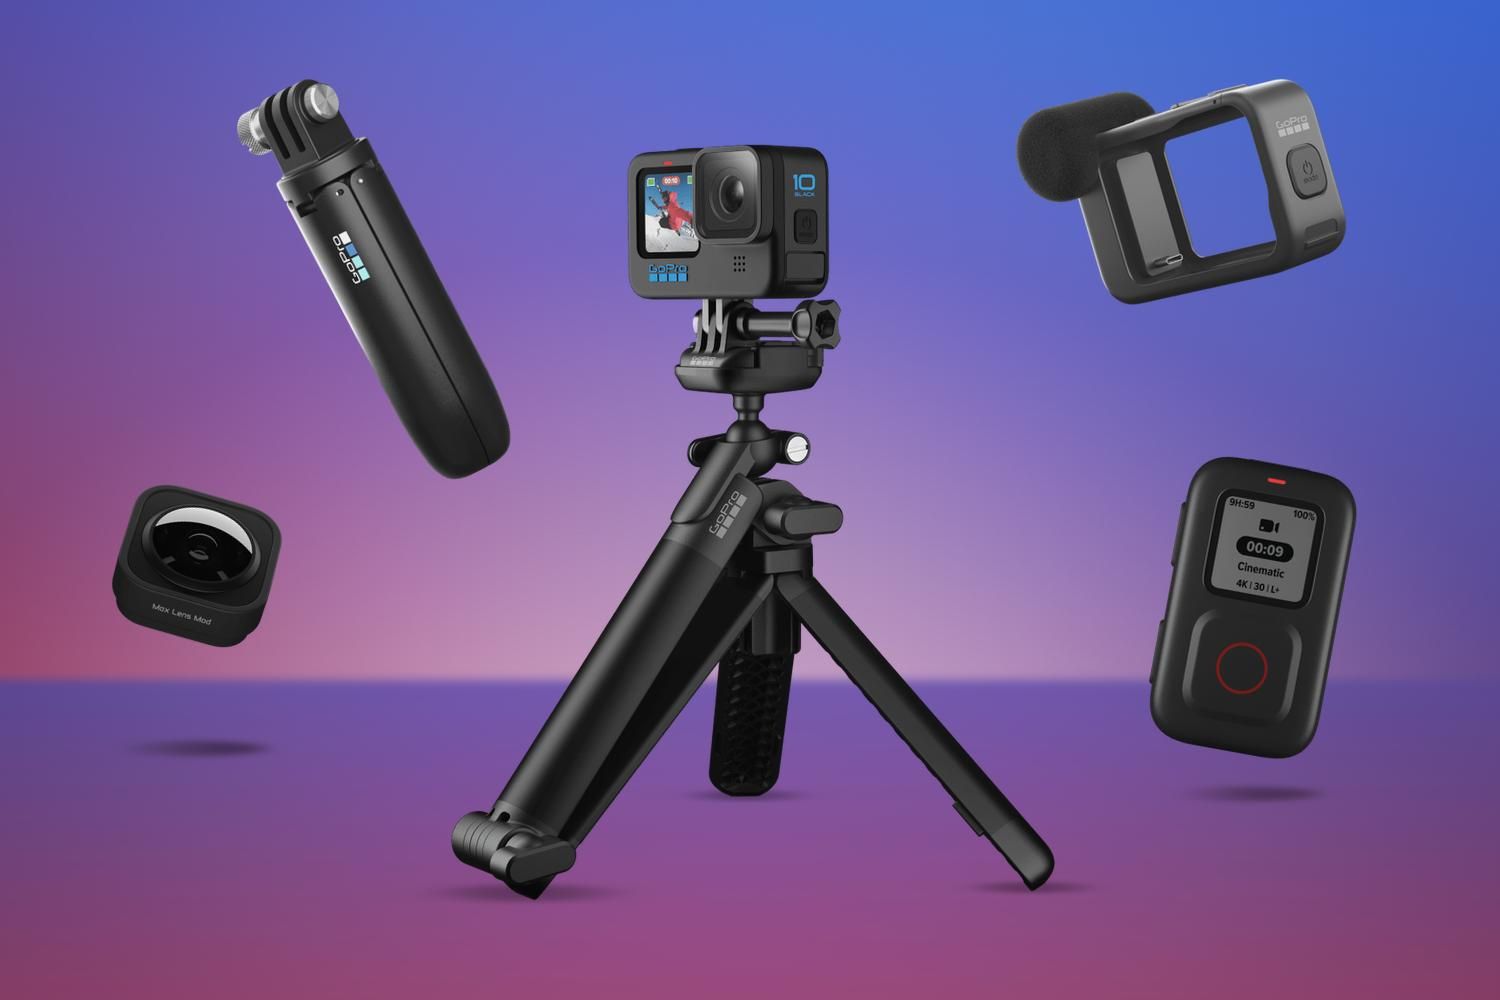 How To Use Accessories With An Action Camera